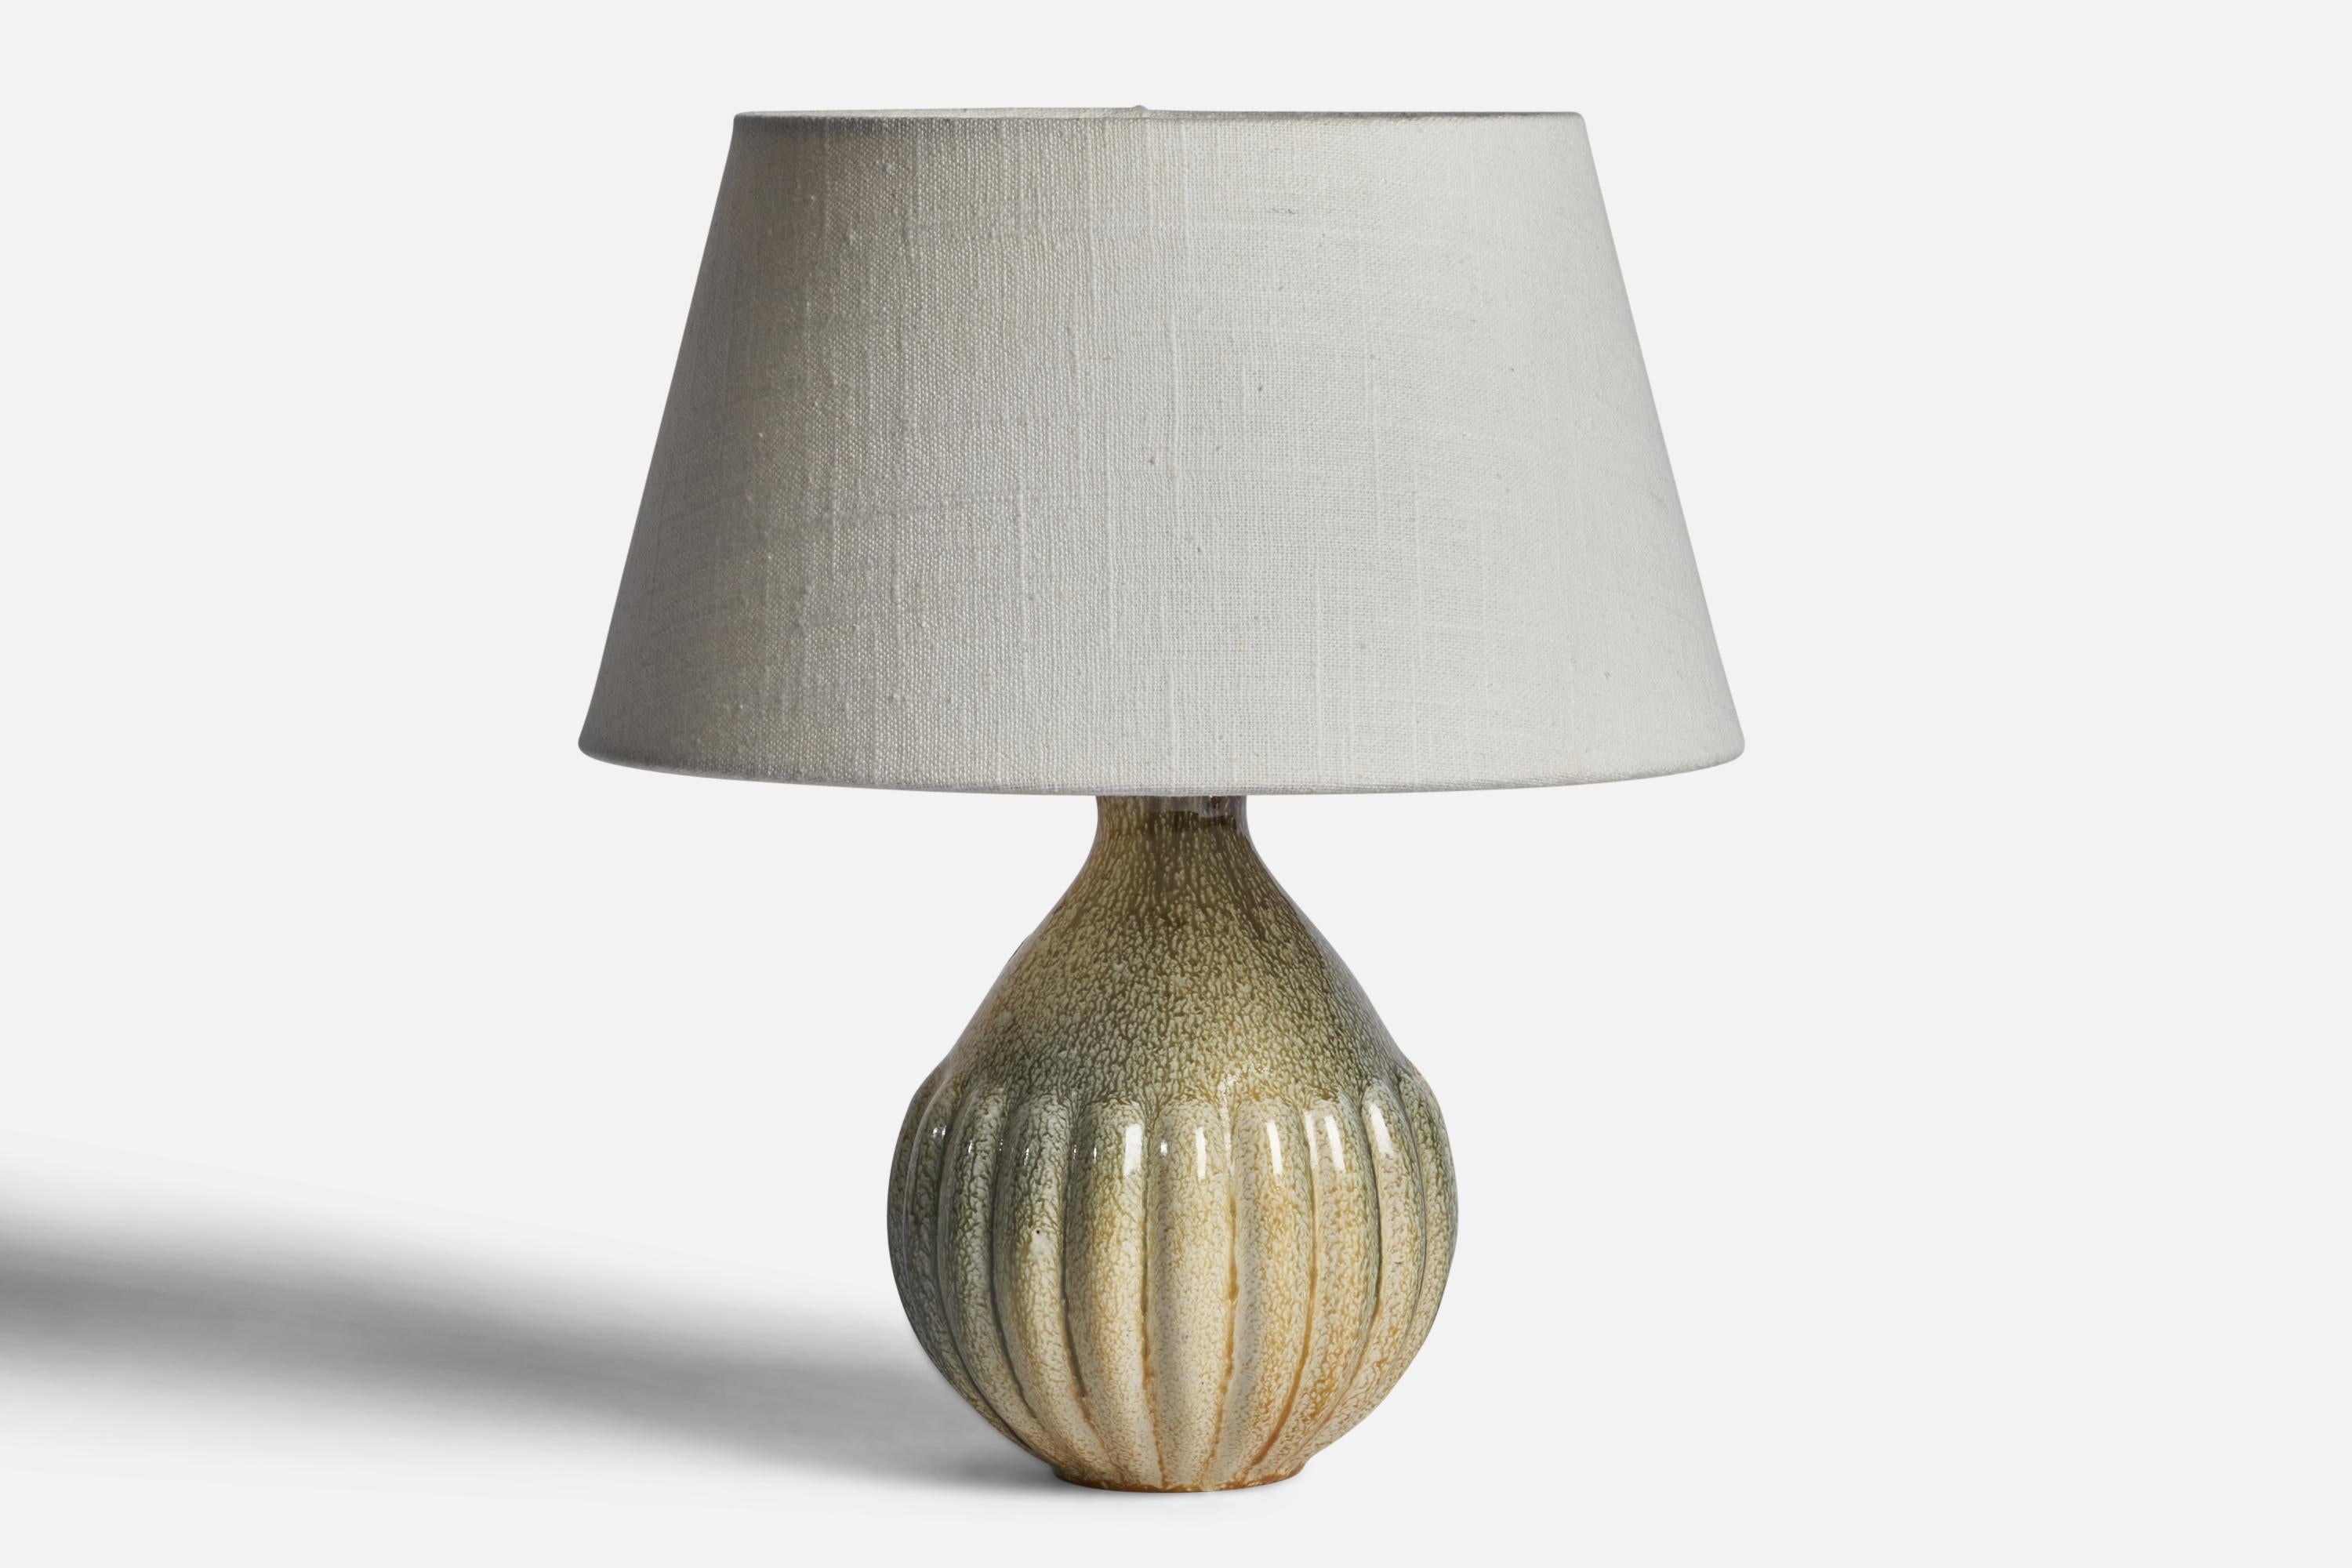 A beige grey-glazed earthenware table lamp designed and produced by Upsala Ekeby, Sweden, 1940s.

Dimensions of Lamp (inches): 8.75” H x 4.75” Diameter
Dimensions of Shade (inches): 7” Top Diameter x 10” Bottom Diameter x 5.5” H 
Dimensions of Lamp